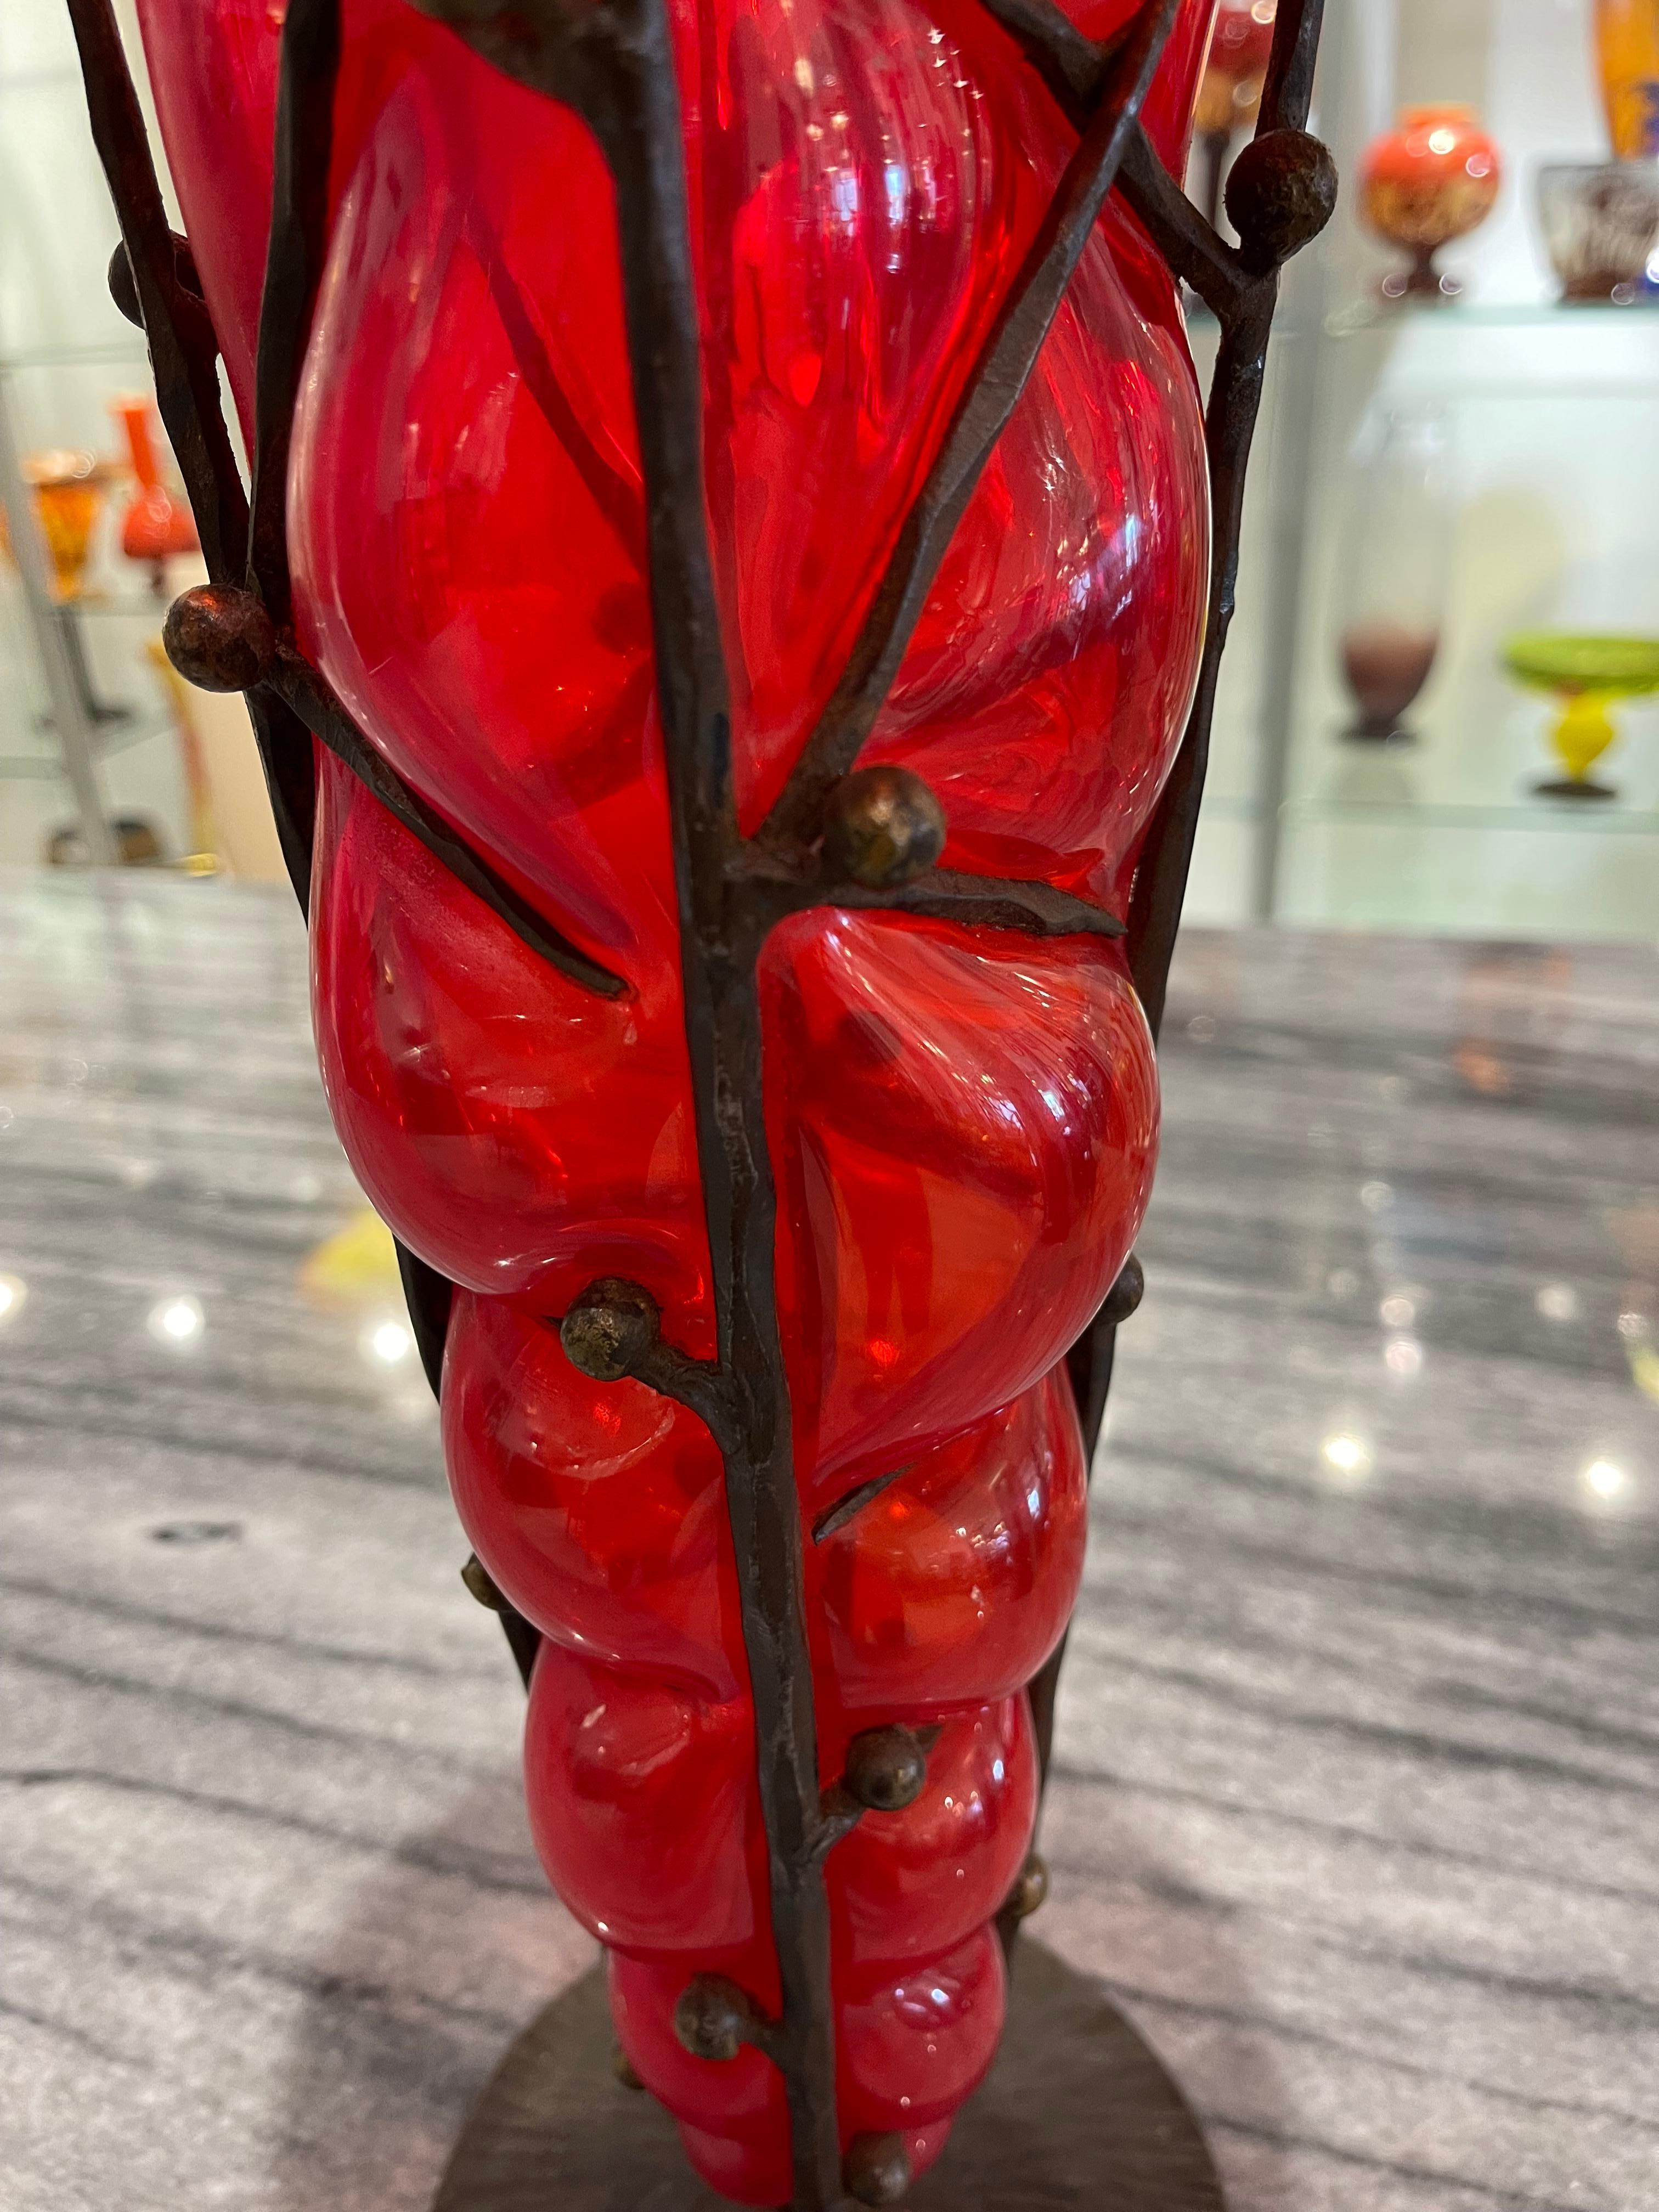 Art Deco glass vase by Charles Schneider in a reticulated technique (glass blown into an iron armature), in a deep red color.
Made in France
Circa: 1920
Signature: Schneider.